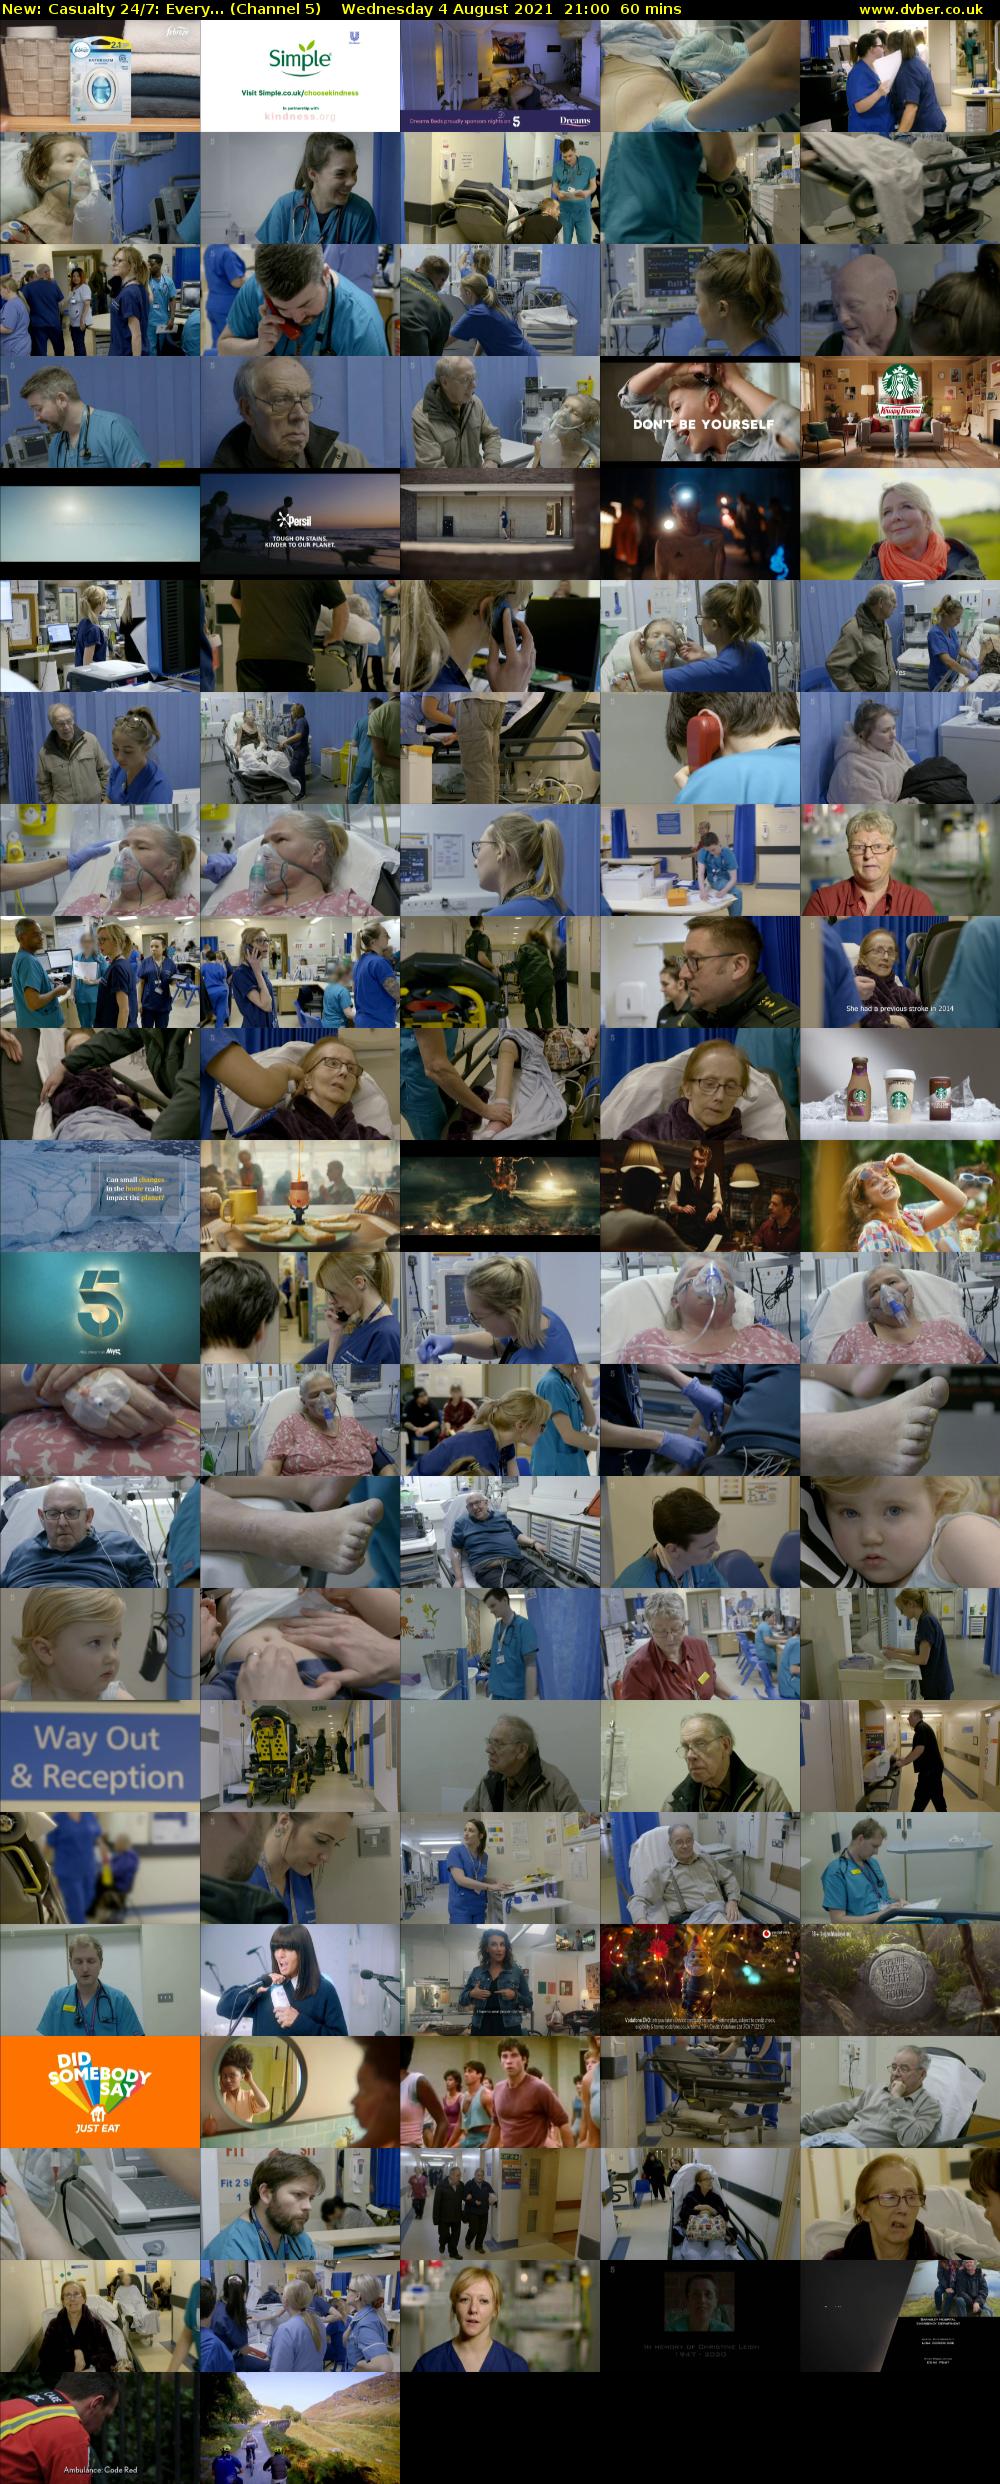 Casualty 24/7: Every... (Channel 5) Wednesday 4 August 2021 21:00 - 22:00